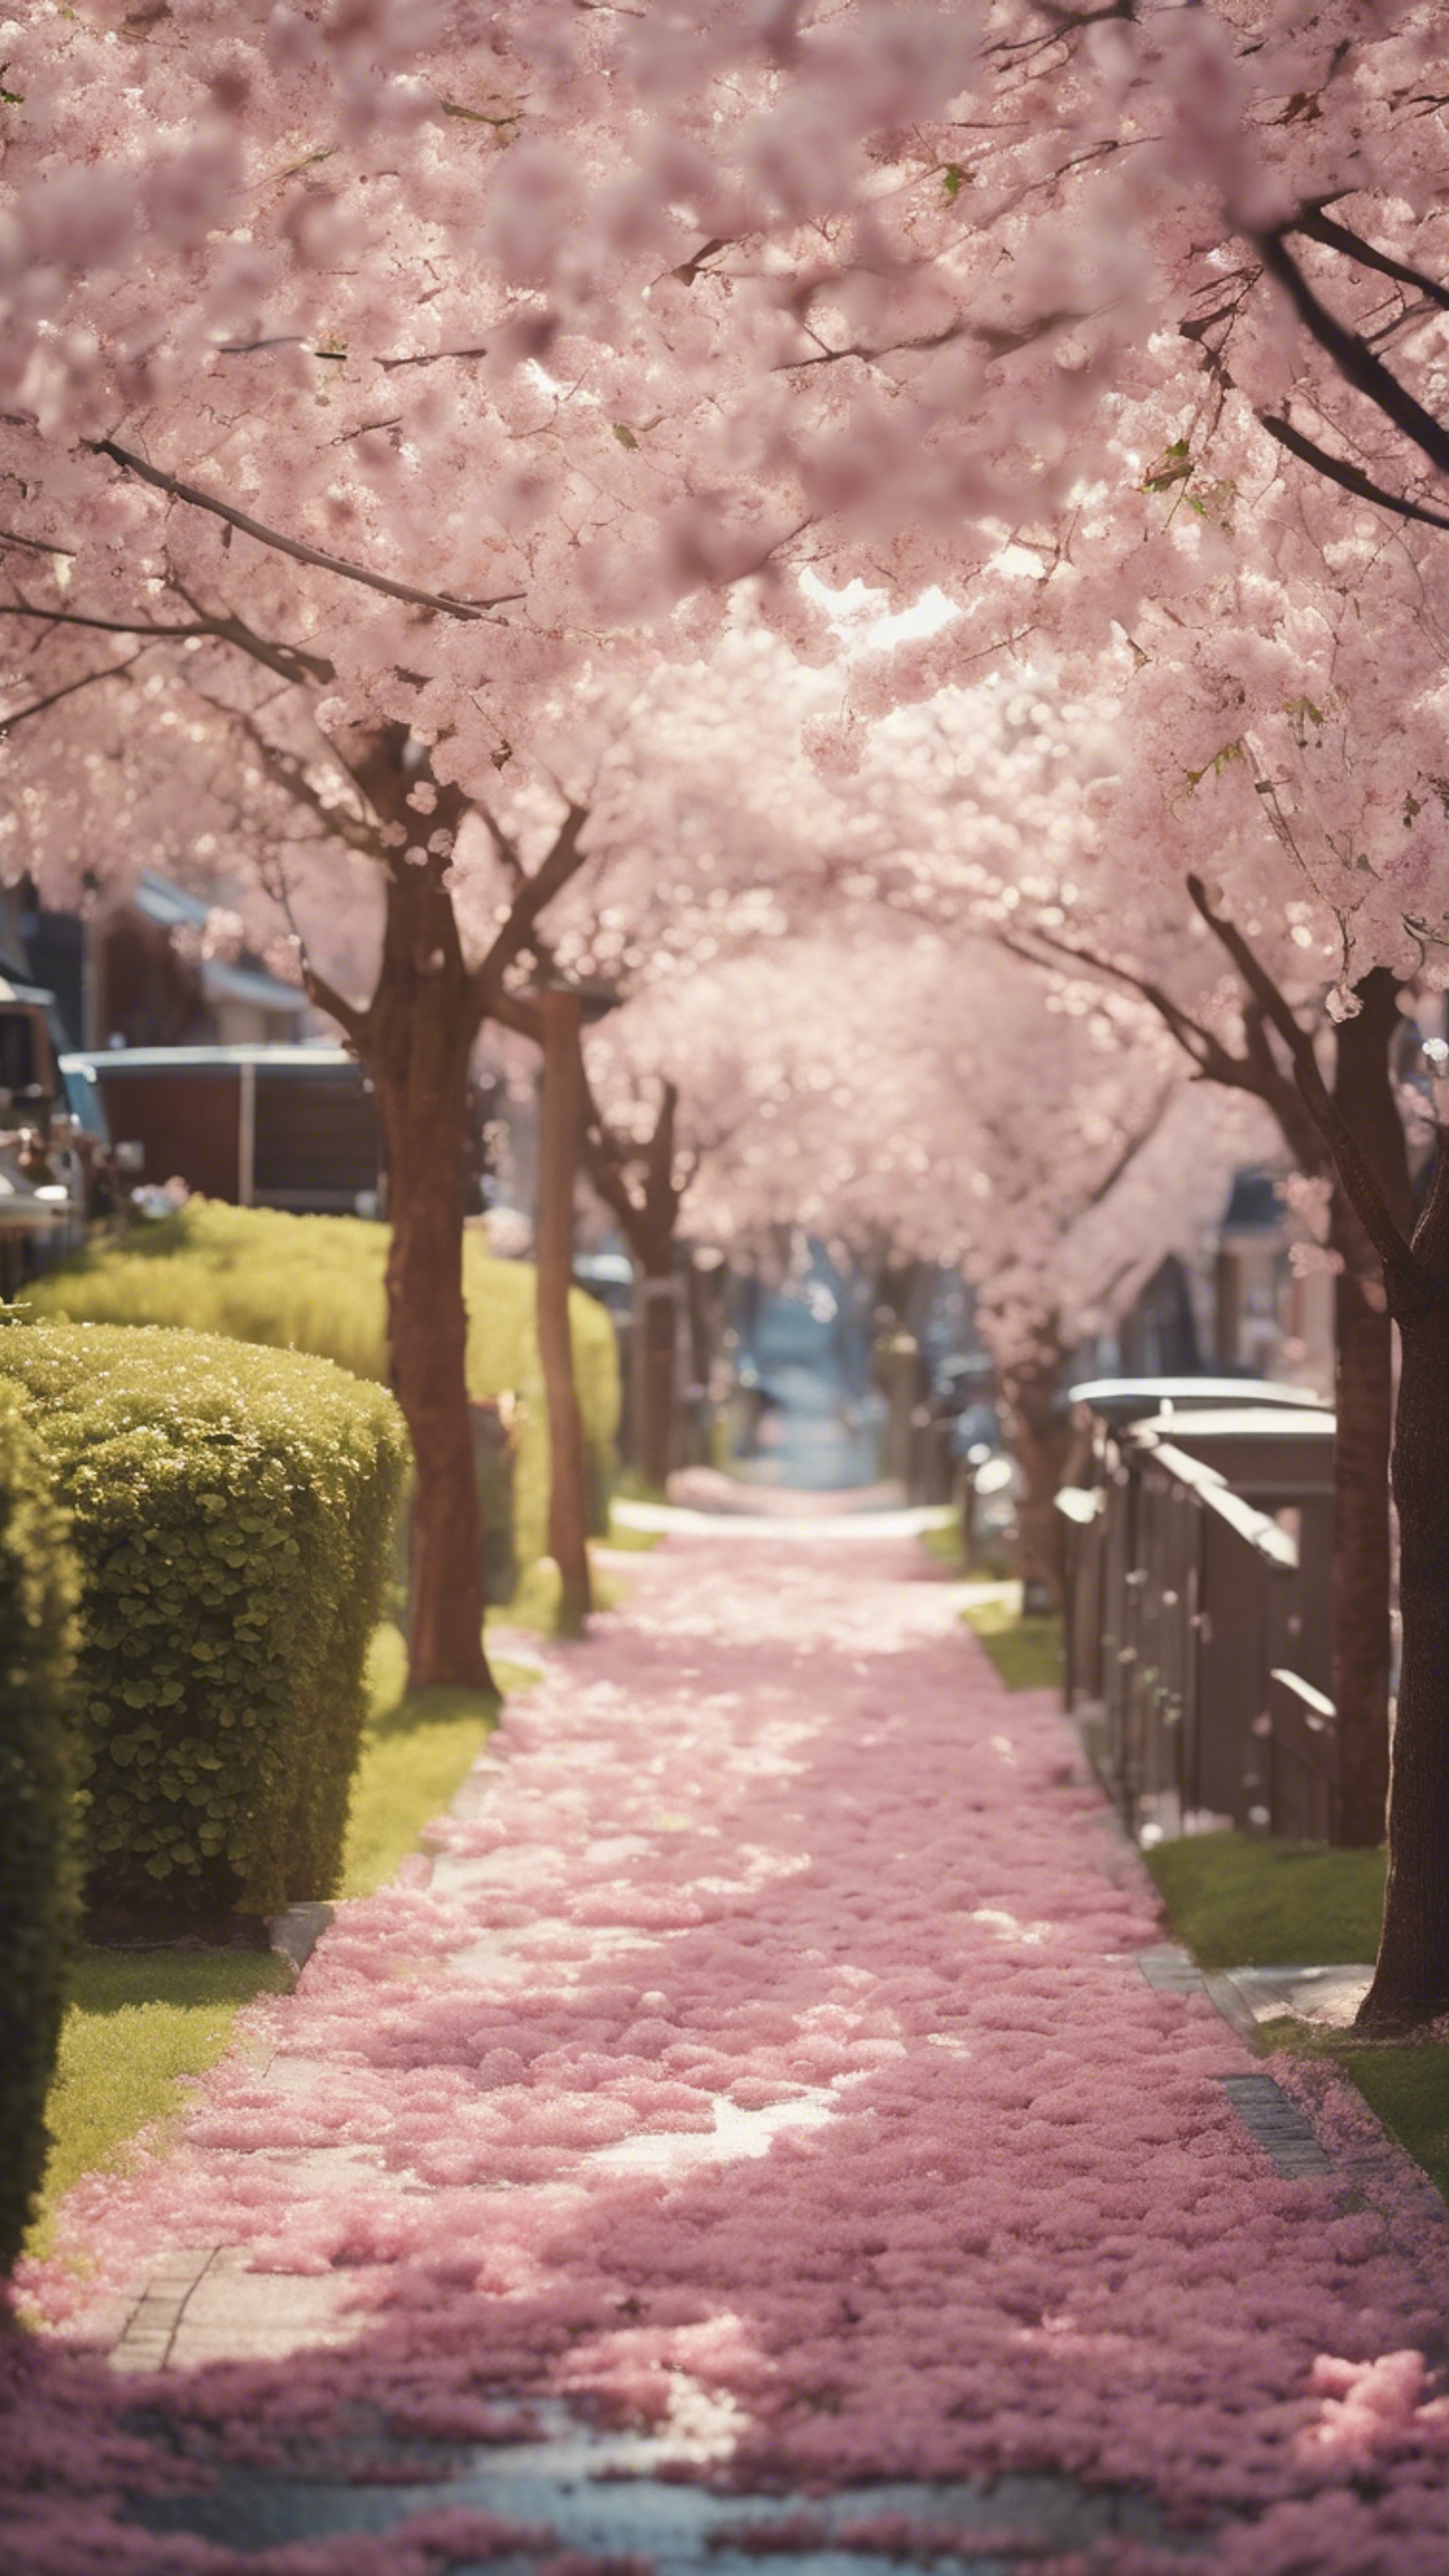 A suburban street lined with houses, and cherry blossom trees showering the pathway with petals, giving an ethereal feel to a sunny spring morning. Fondo de pantalla[d085be0bf6ea43718843]